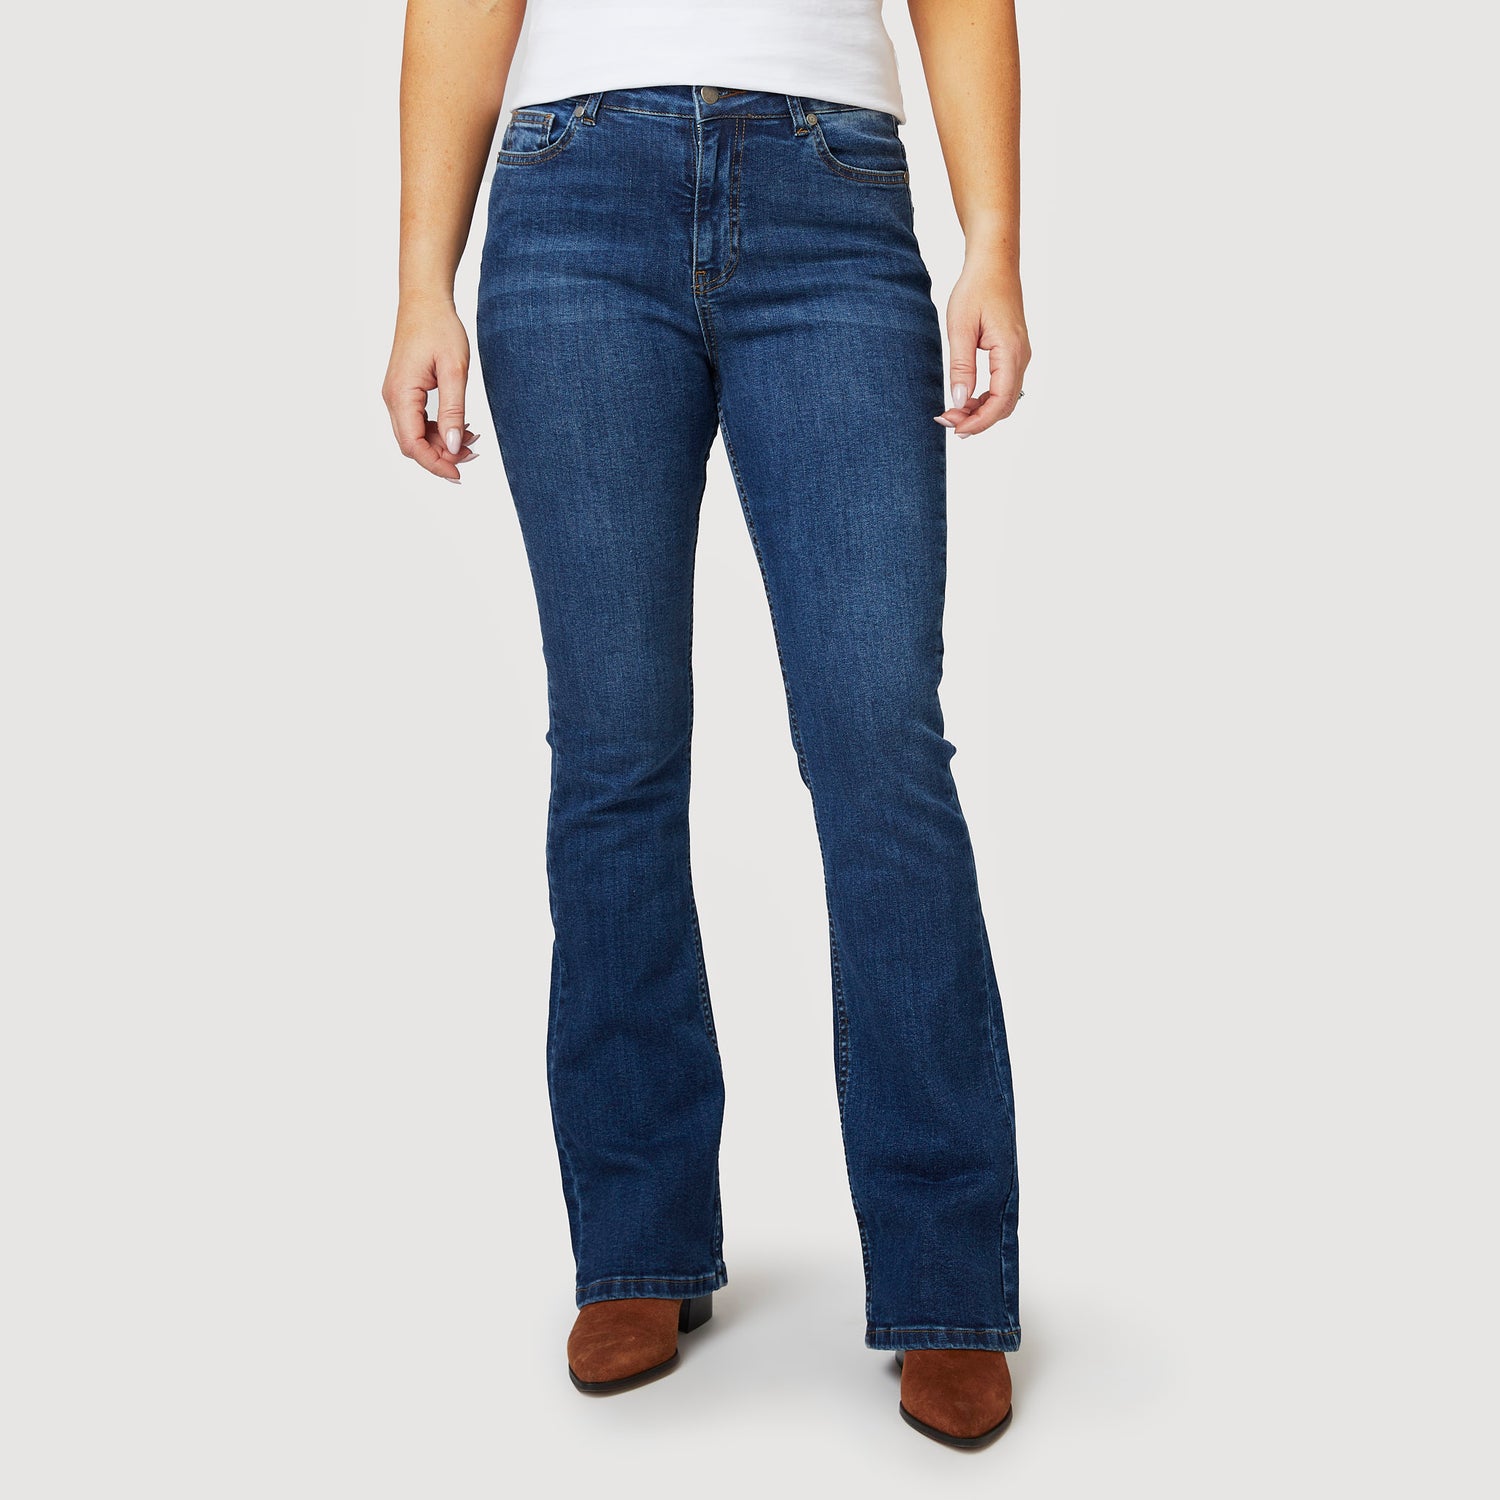 Flare/Bootcut jeans